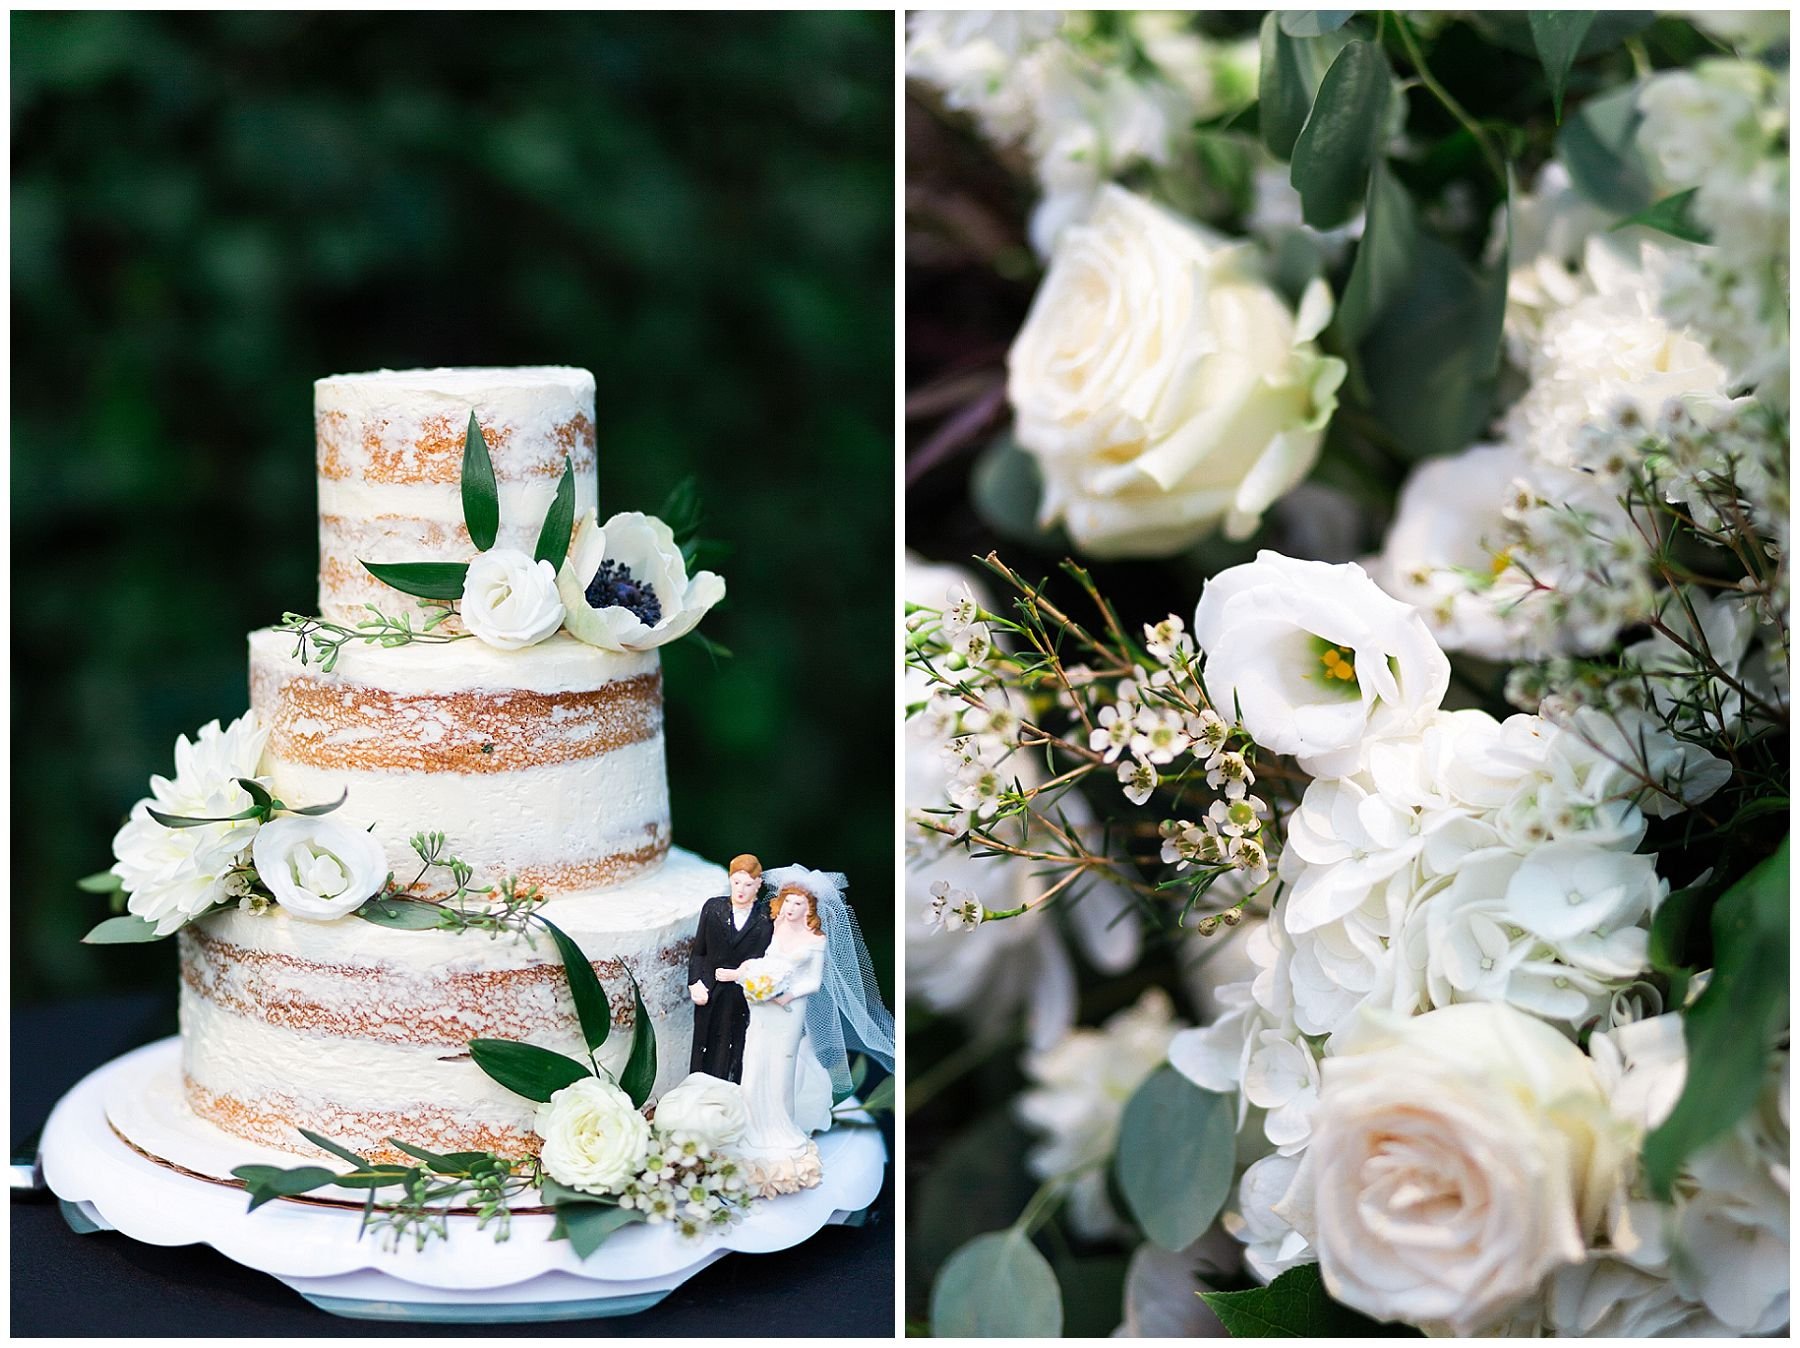 Naked wedding cake with floral accents.